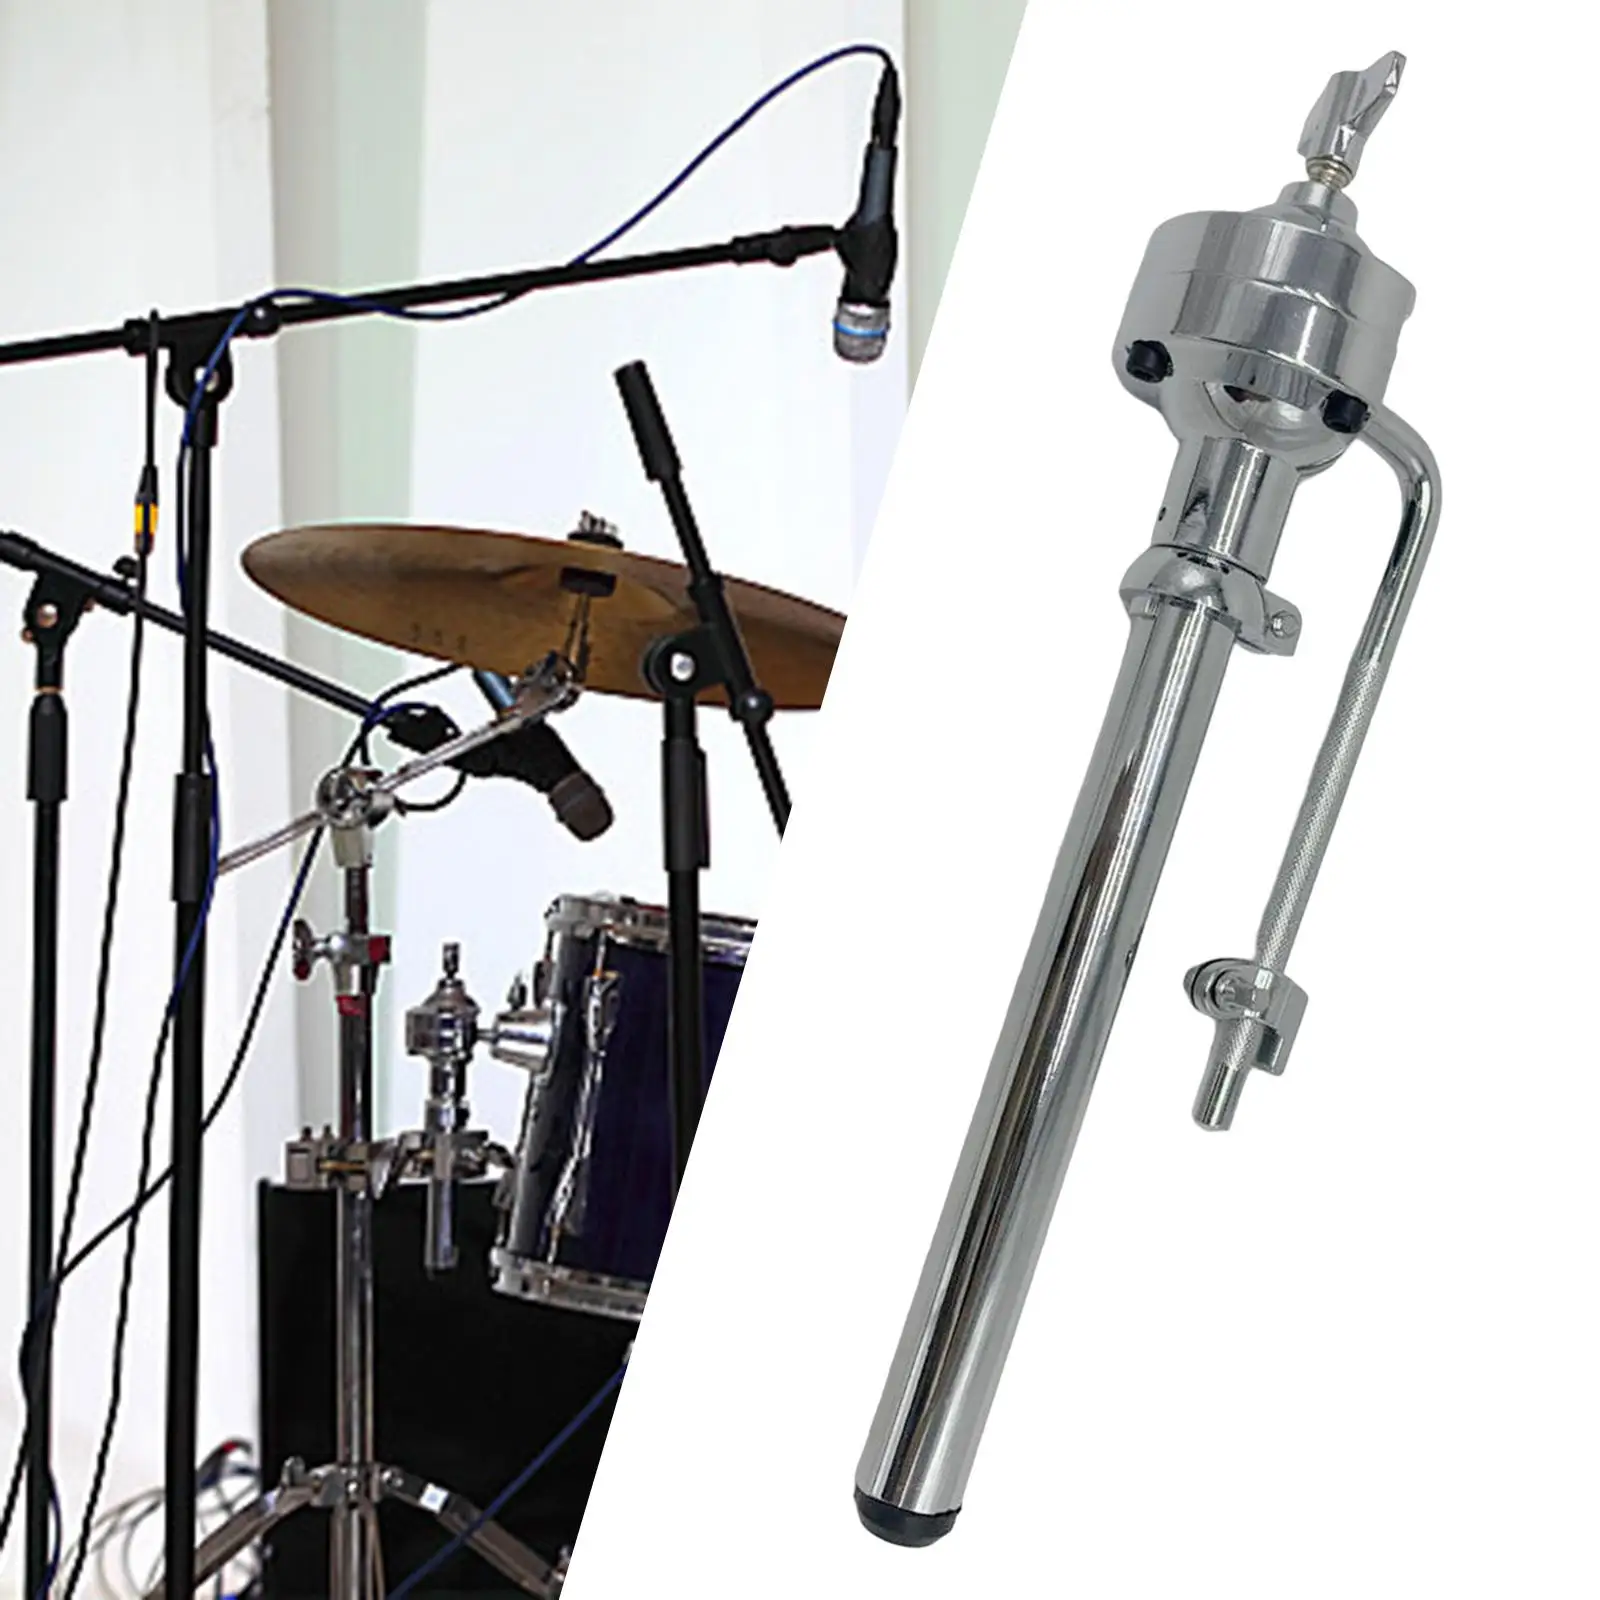 Single Tom Holder Stand Mount Bracket Alloy Drum Kit Tom Holder Drum Mount for Drum Player Hardware Percussion Accessory